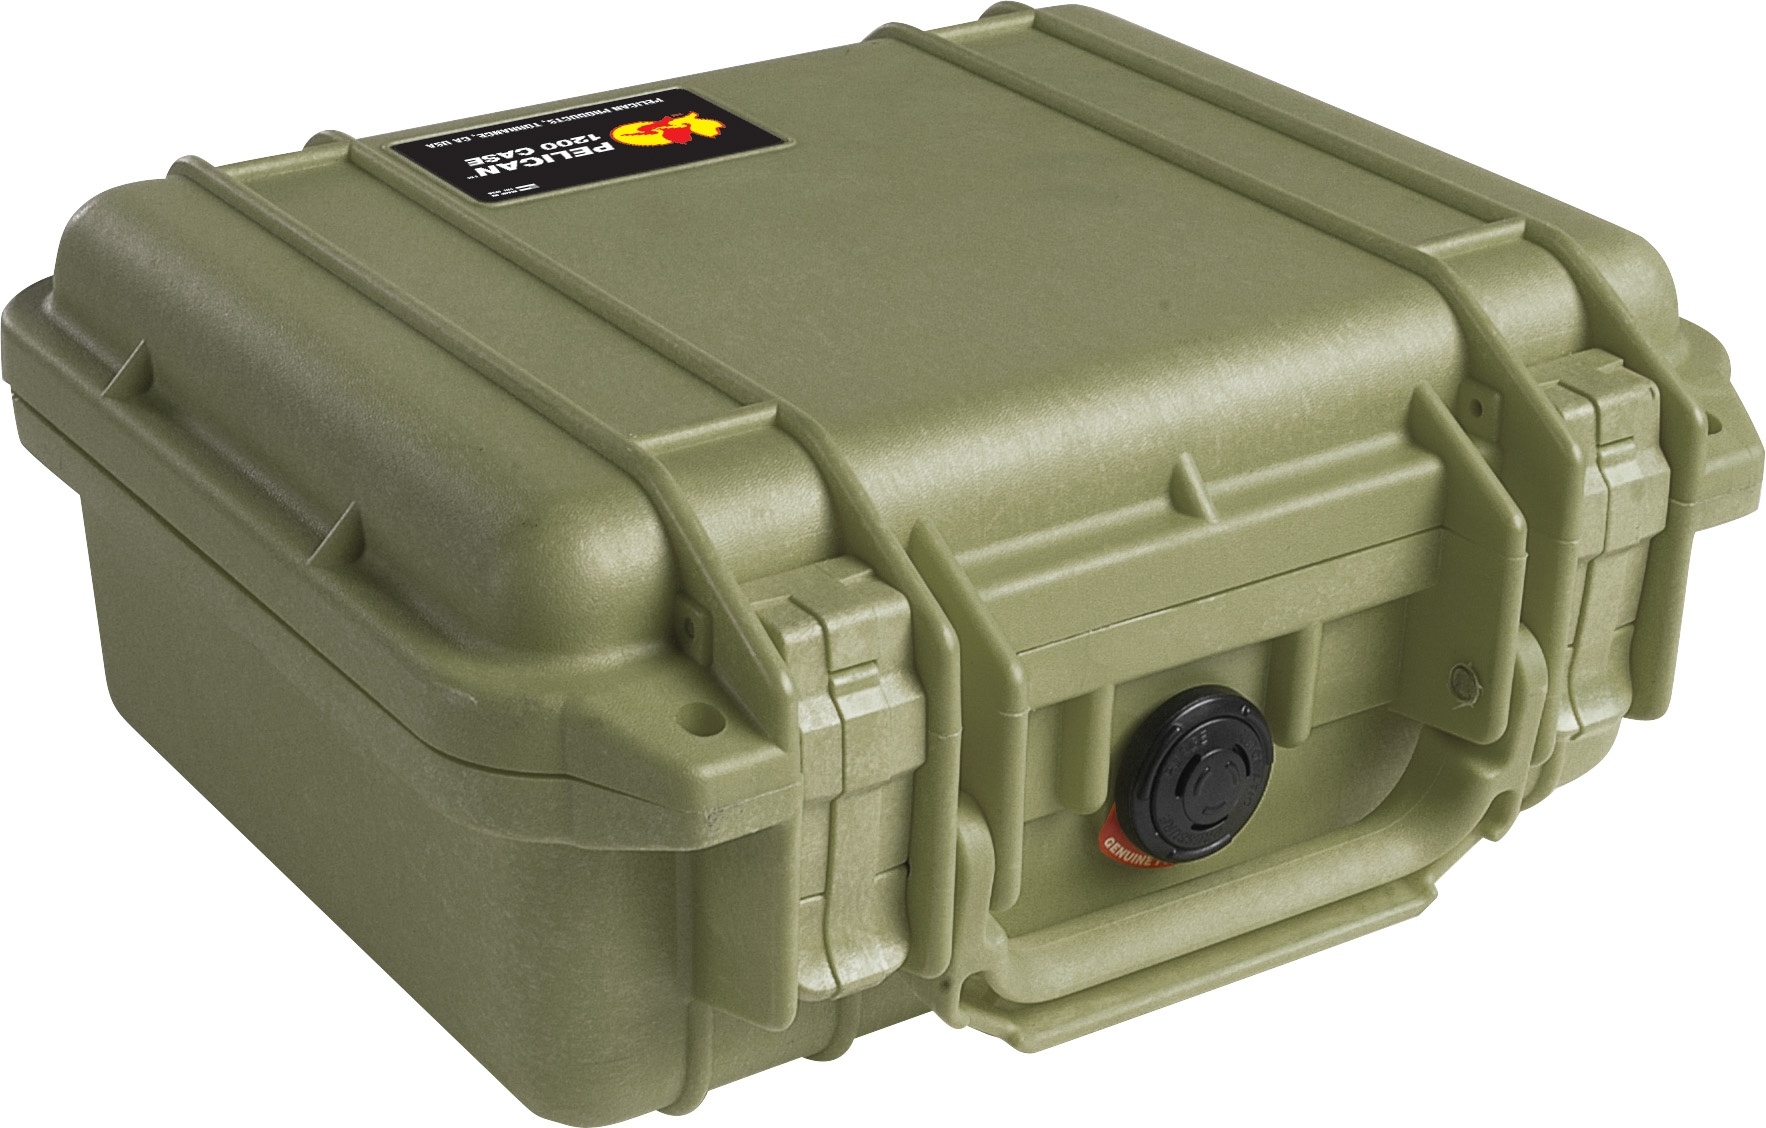 Pelican 1200 Case without Foam (Olive Drab Green)